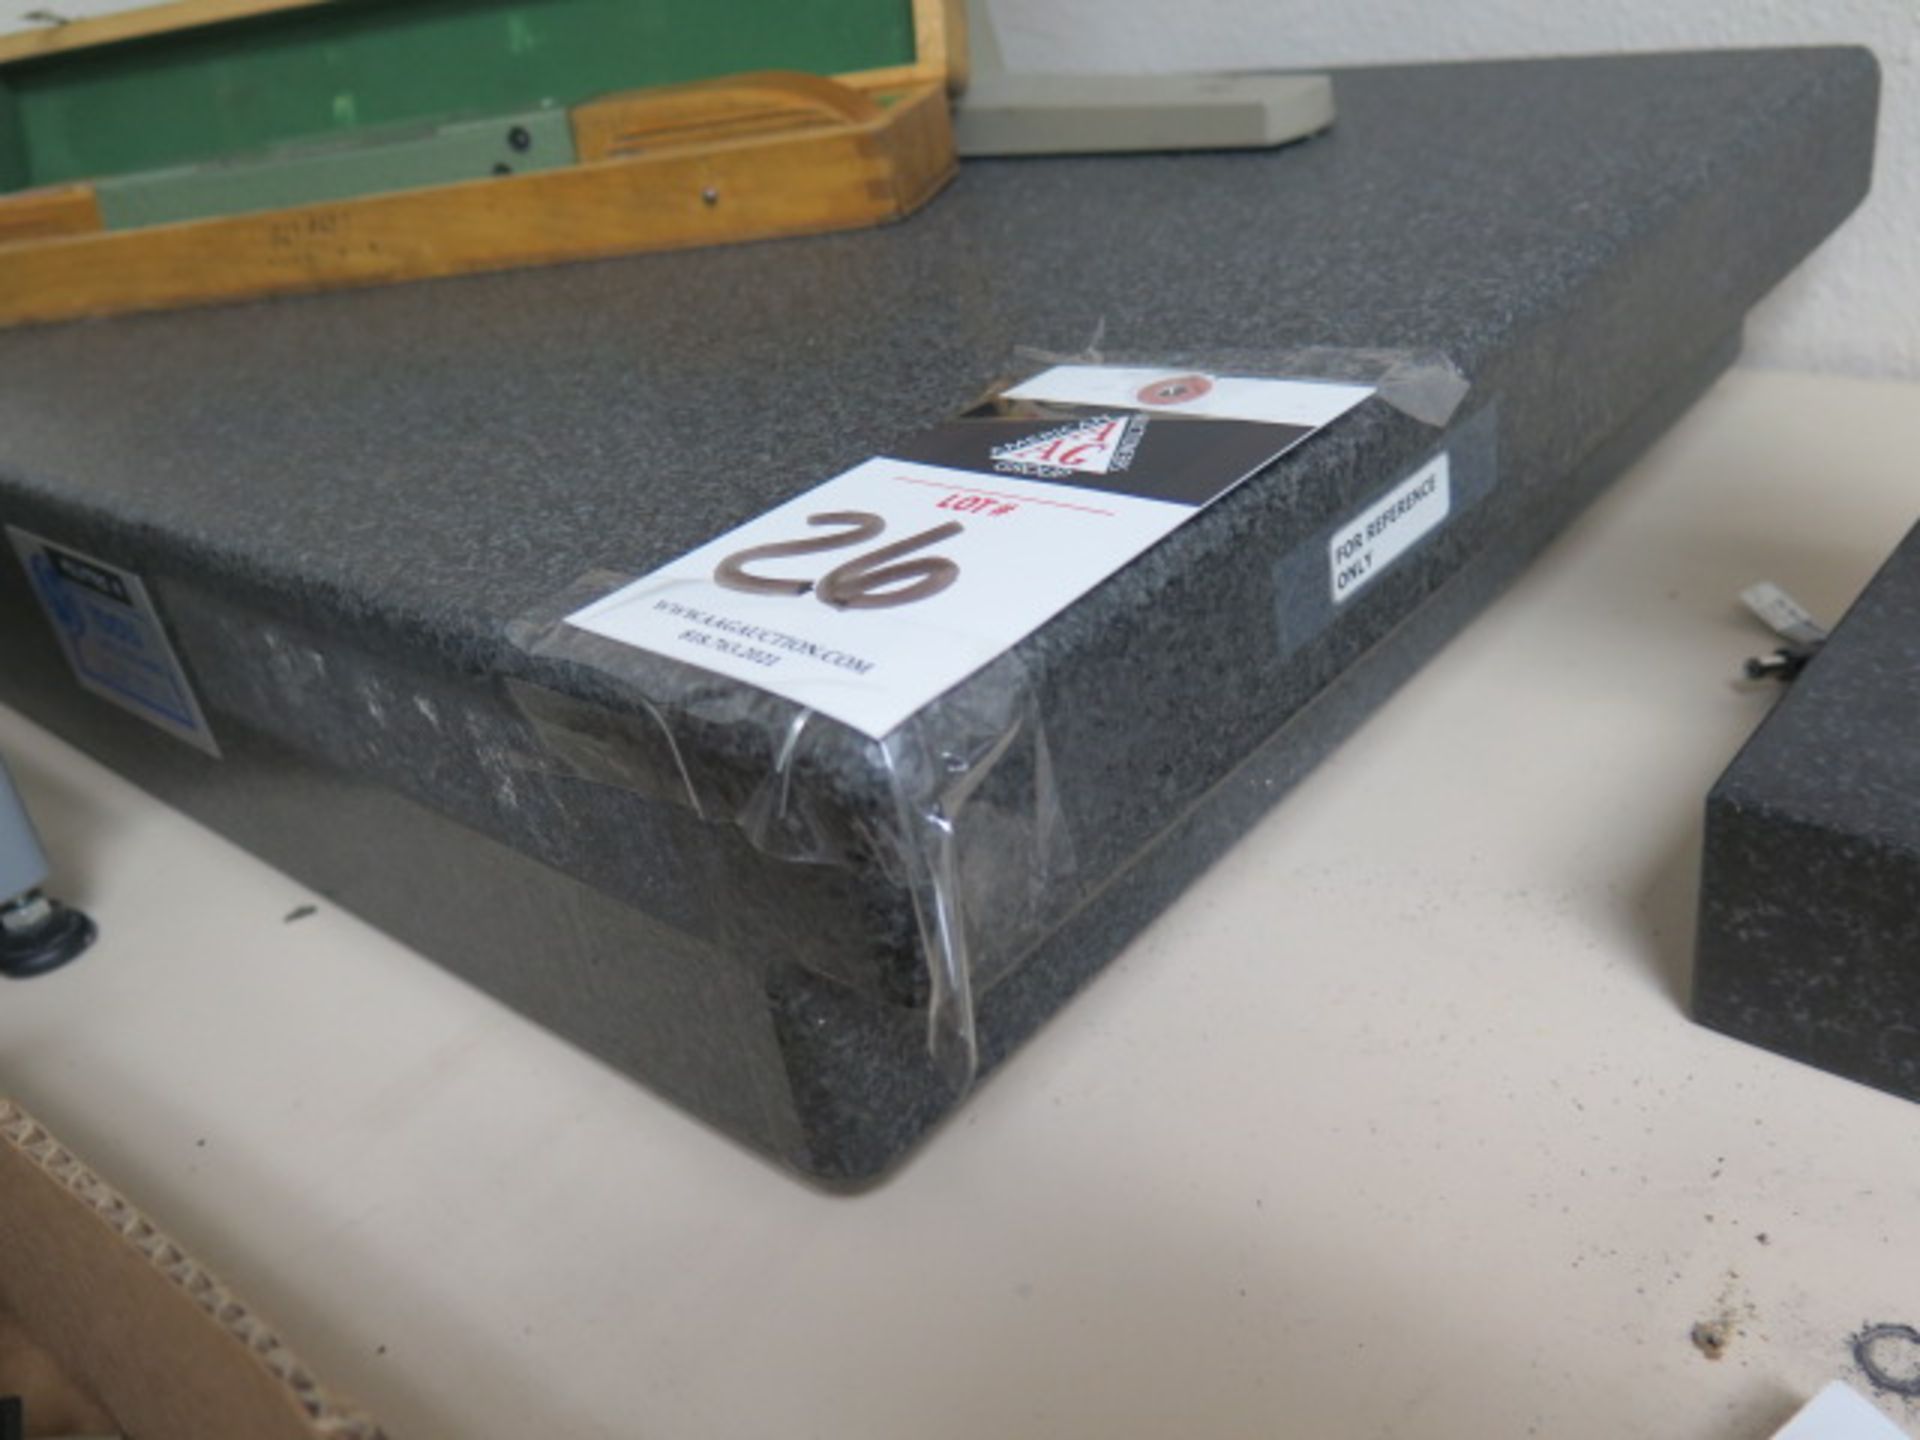 18” x 24” x 4” 2-Ledge Granite Surface Plate (SOLD AS-IS - NO WARRANTY) - Image 2 of 4